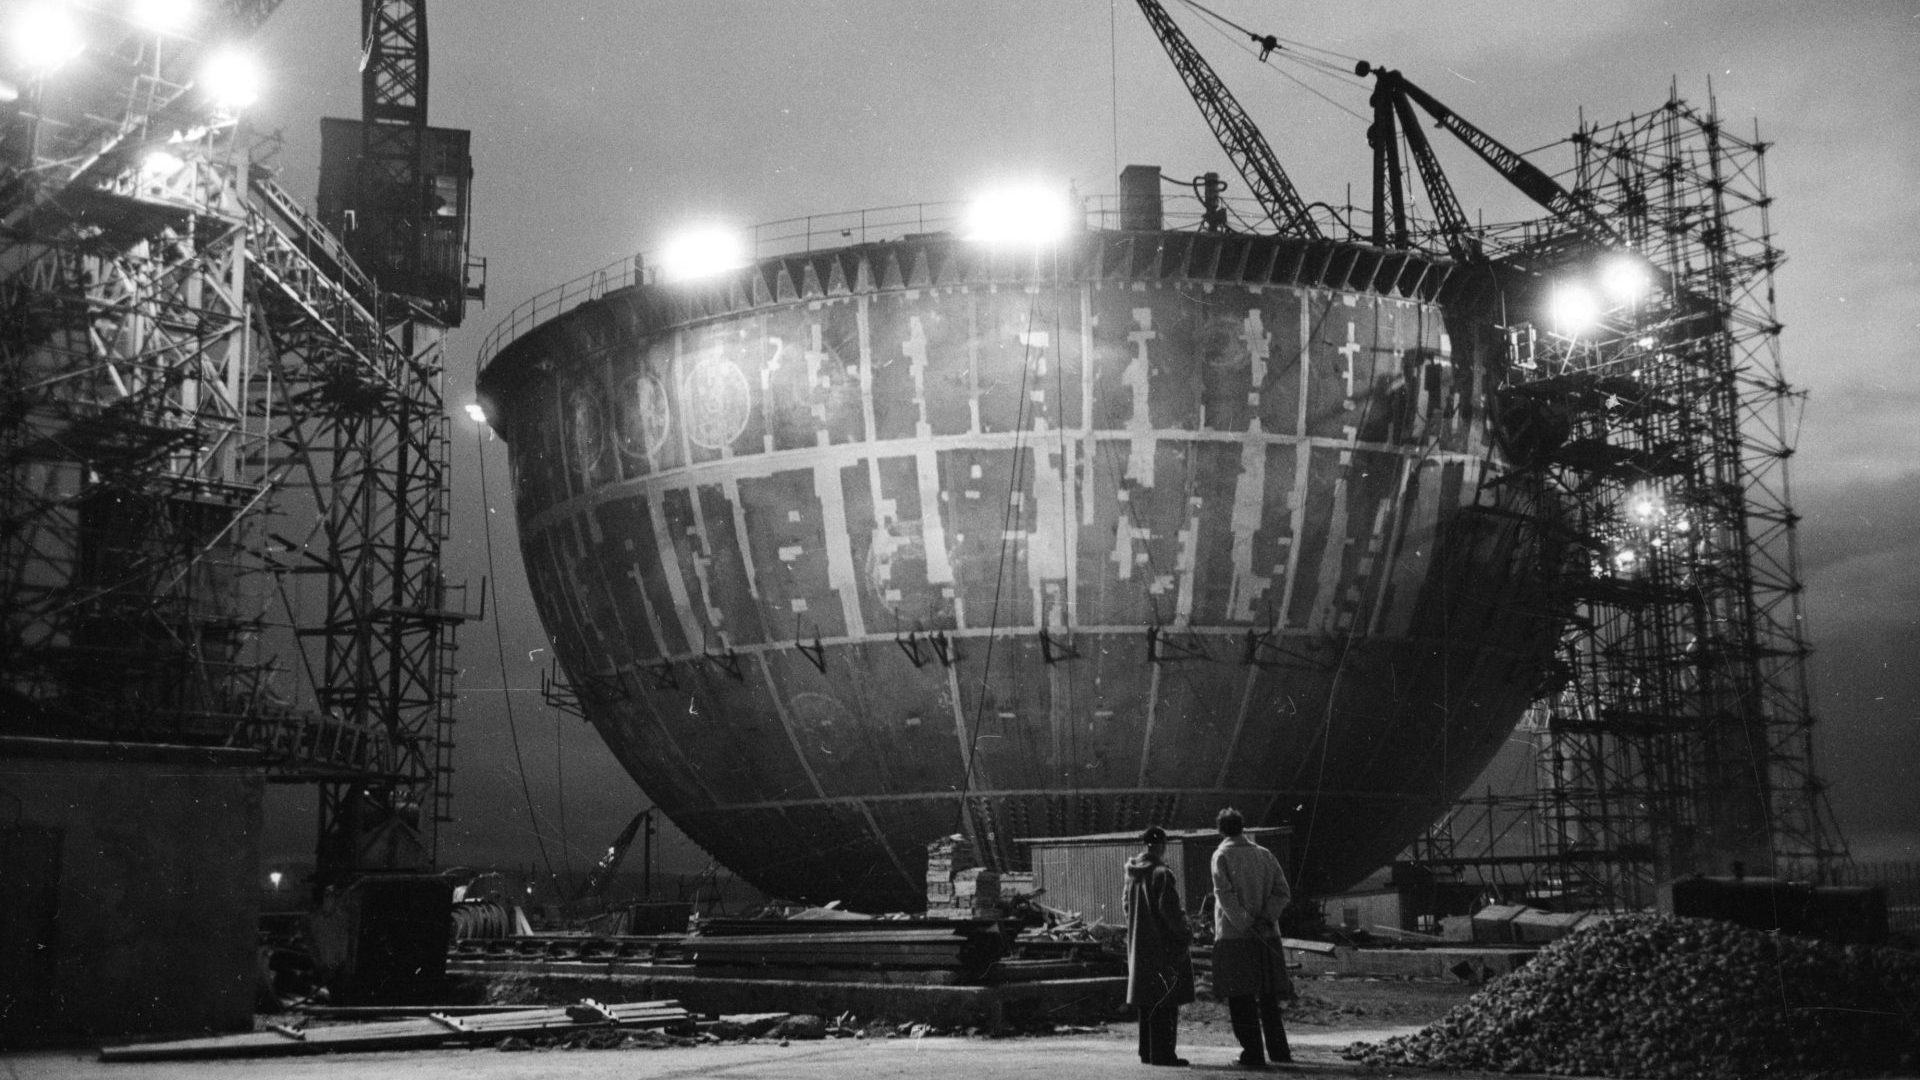 Construction of the reactor at the Dounreay atomic power plant in Scotland, 1956. Dounreay was Britain’s first fast reactor. Photo: Charles Hewitt/Picture Post/Hulton Archive/Getty